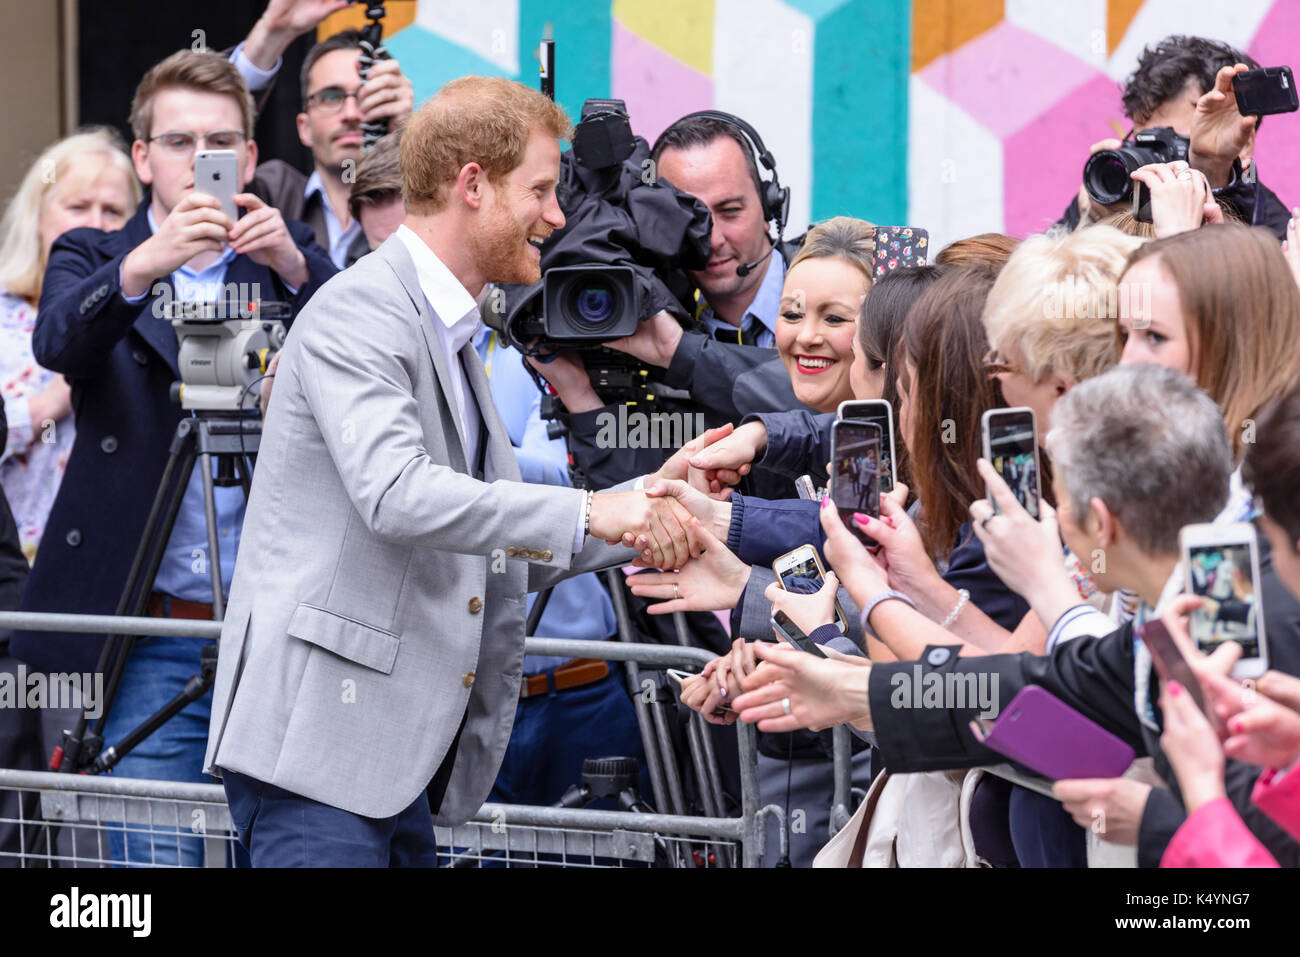 Belfast, Northern Ireland. 07/09/2017 -  Prince Harry meets the public during walkabout in Belfast on his first Northern Ireland visit. Stock Photo